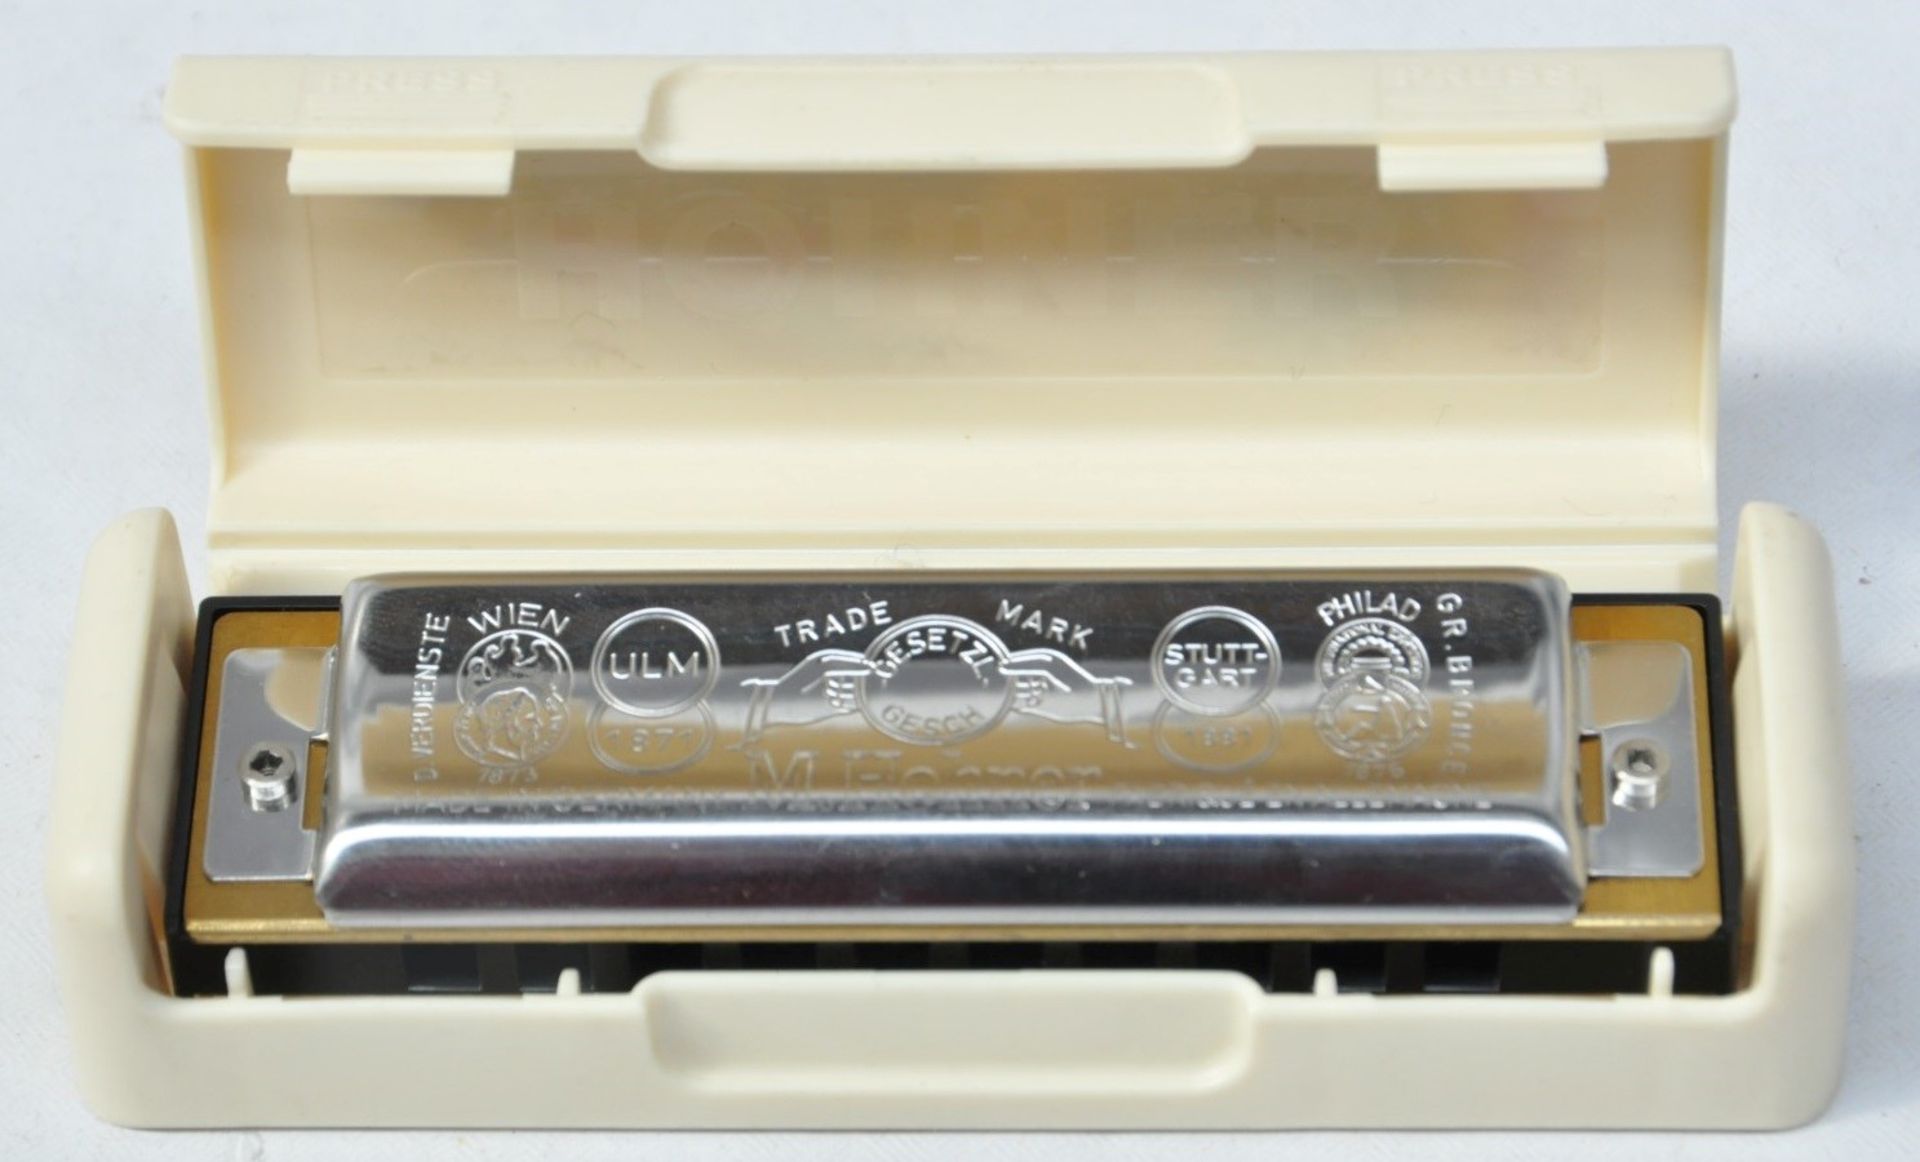 1 x Hohner Big River Harp Mouth Harmonica - Made in Germany - Key G - CL020 - Ref Pro89 - Unused - Image 4 of 5